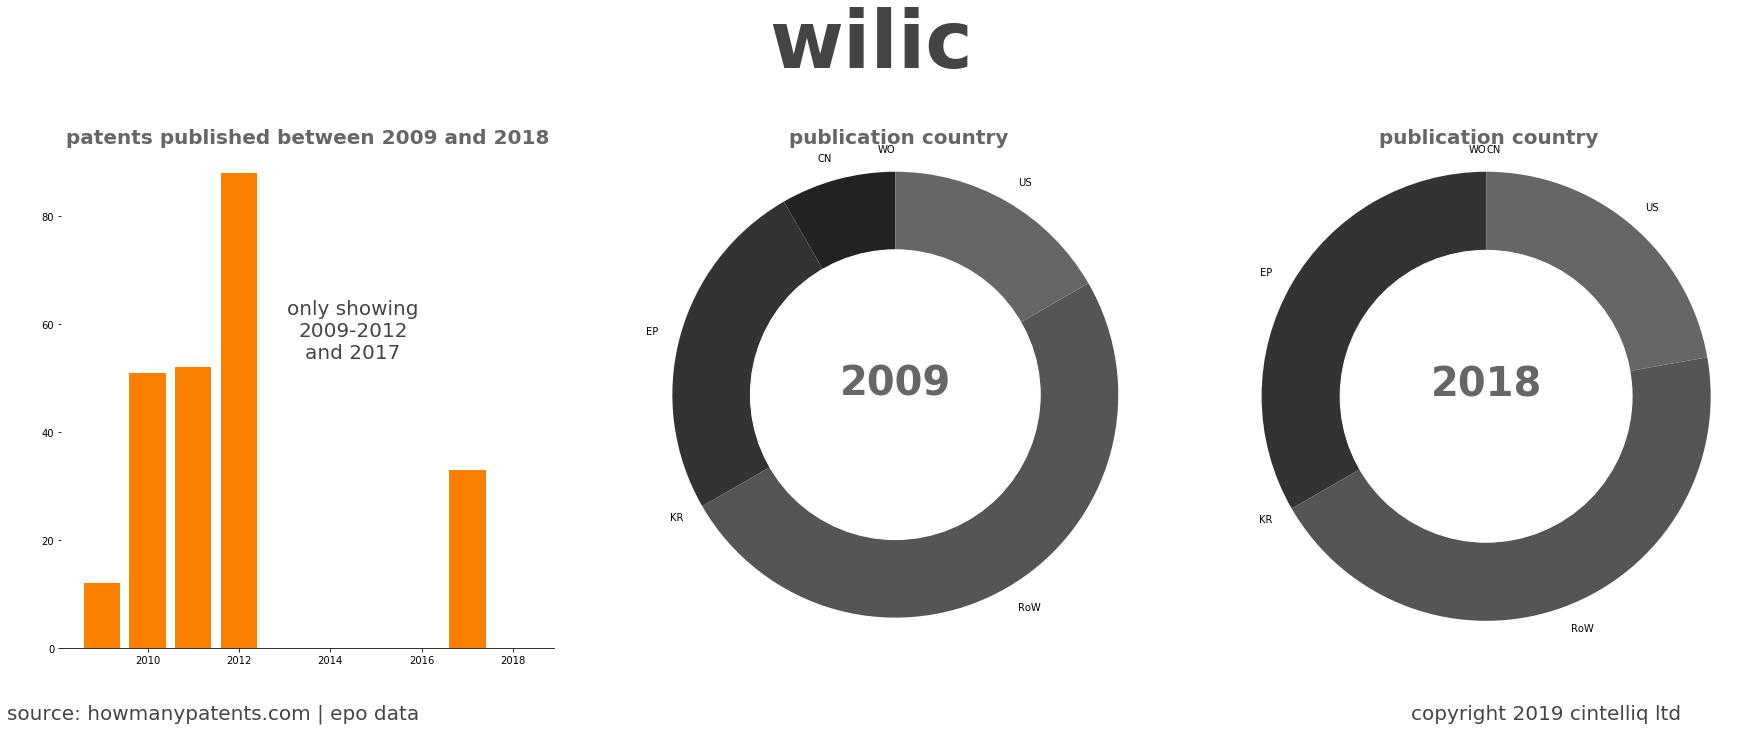 summary of patents for Wilic